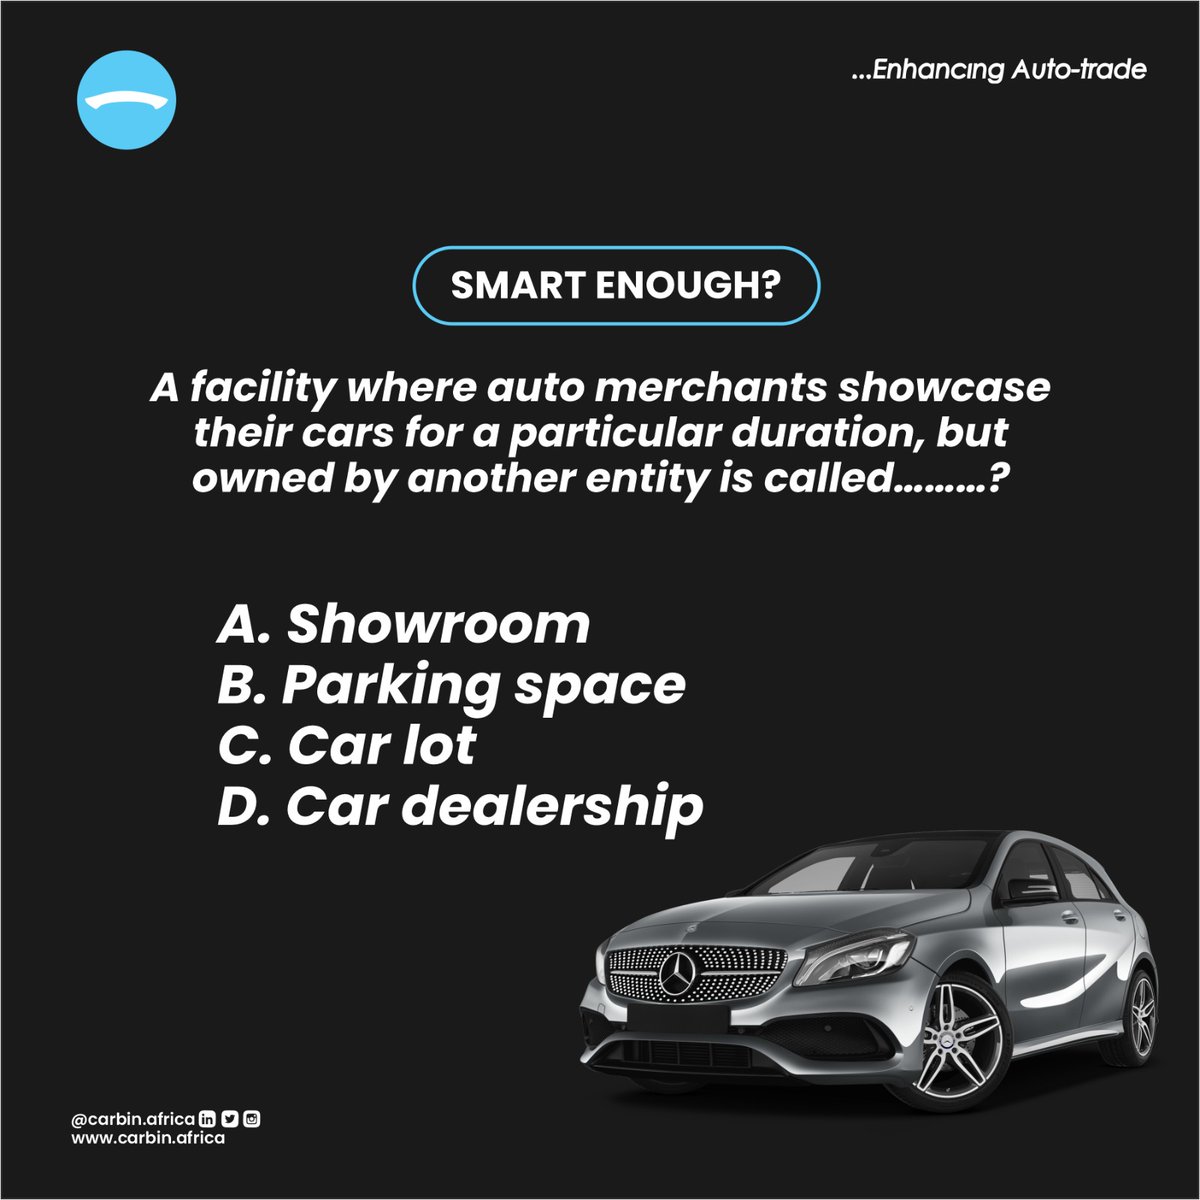 It's question time! 

What’s the name for a place where auto merchants showcase their cars, but it’s not owned by them?🤔

Tag 3 of friends to follow us when you answer, who knows, we just may be rewarding you! 

#AutoShowcase #CarExpo #RetailRevolution #ParkNSell #CarbinAfrica